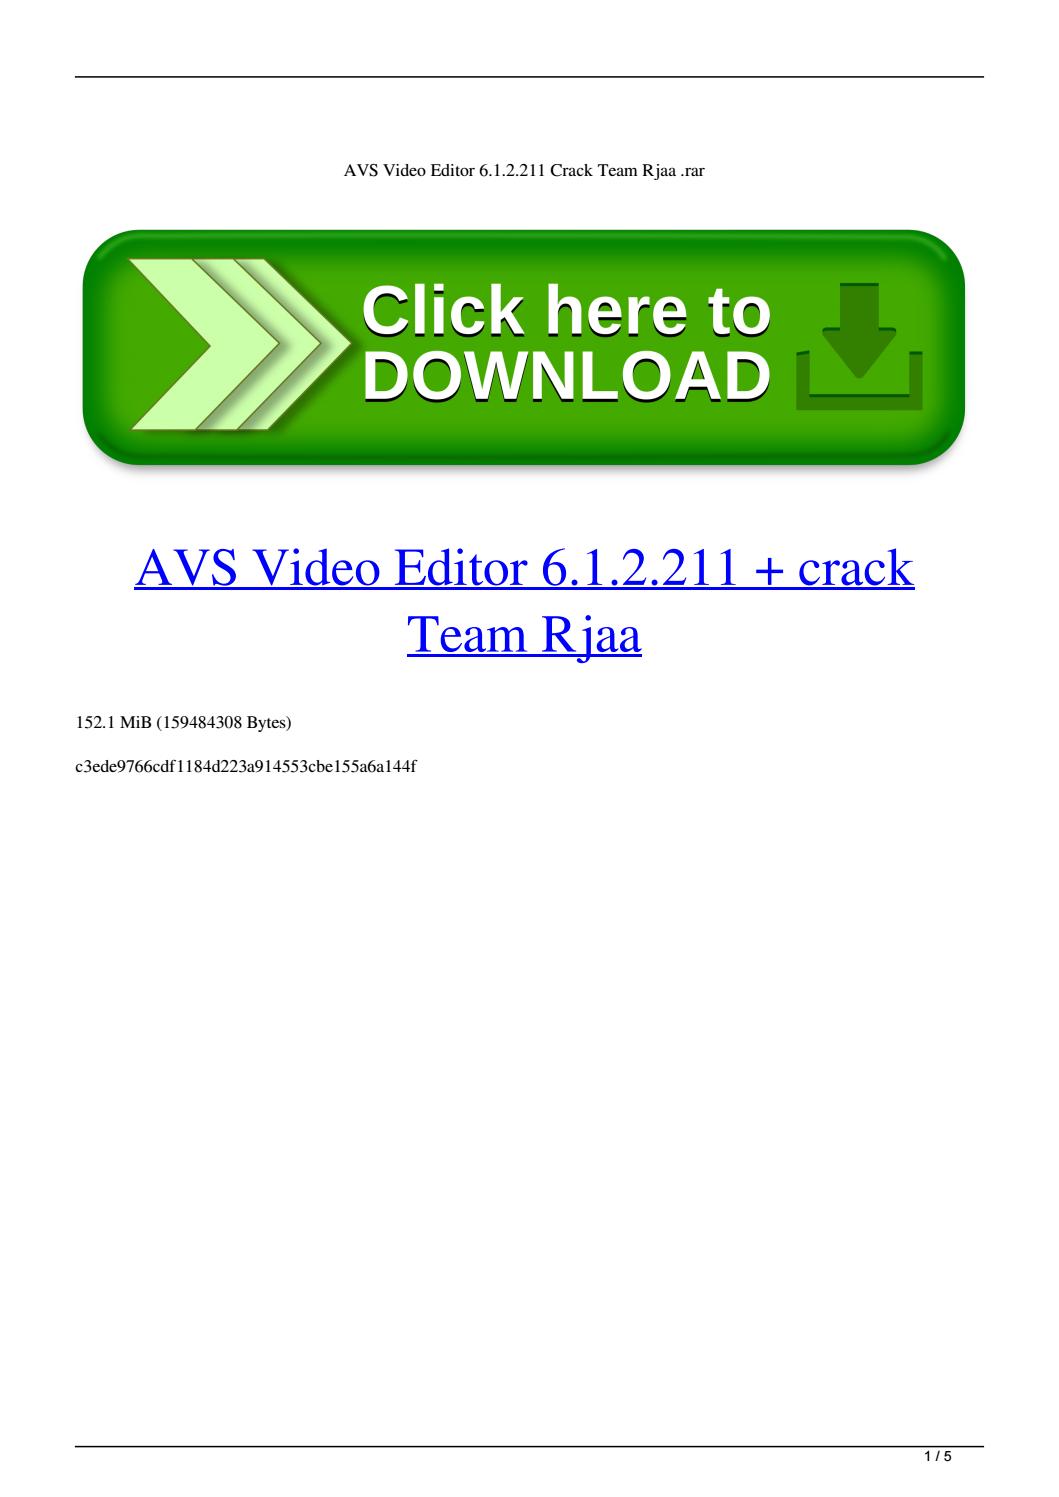 Avs Video Editor 4.2 Activation Code Free